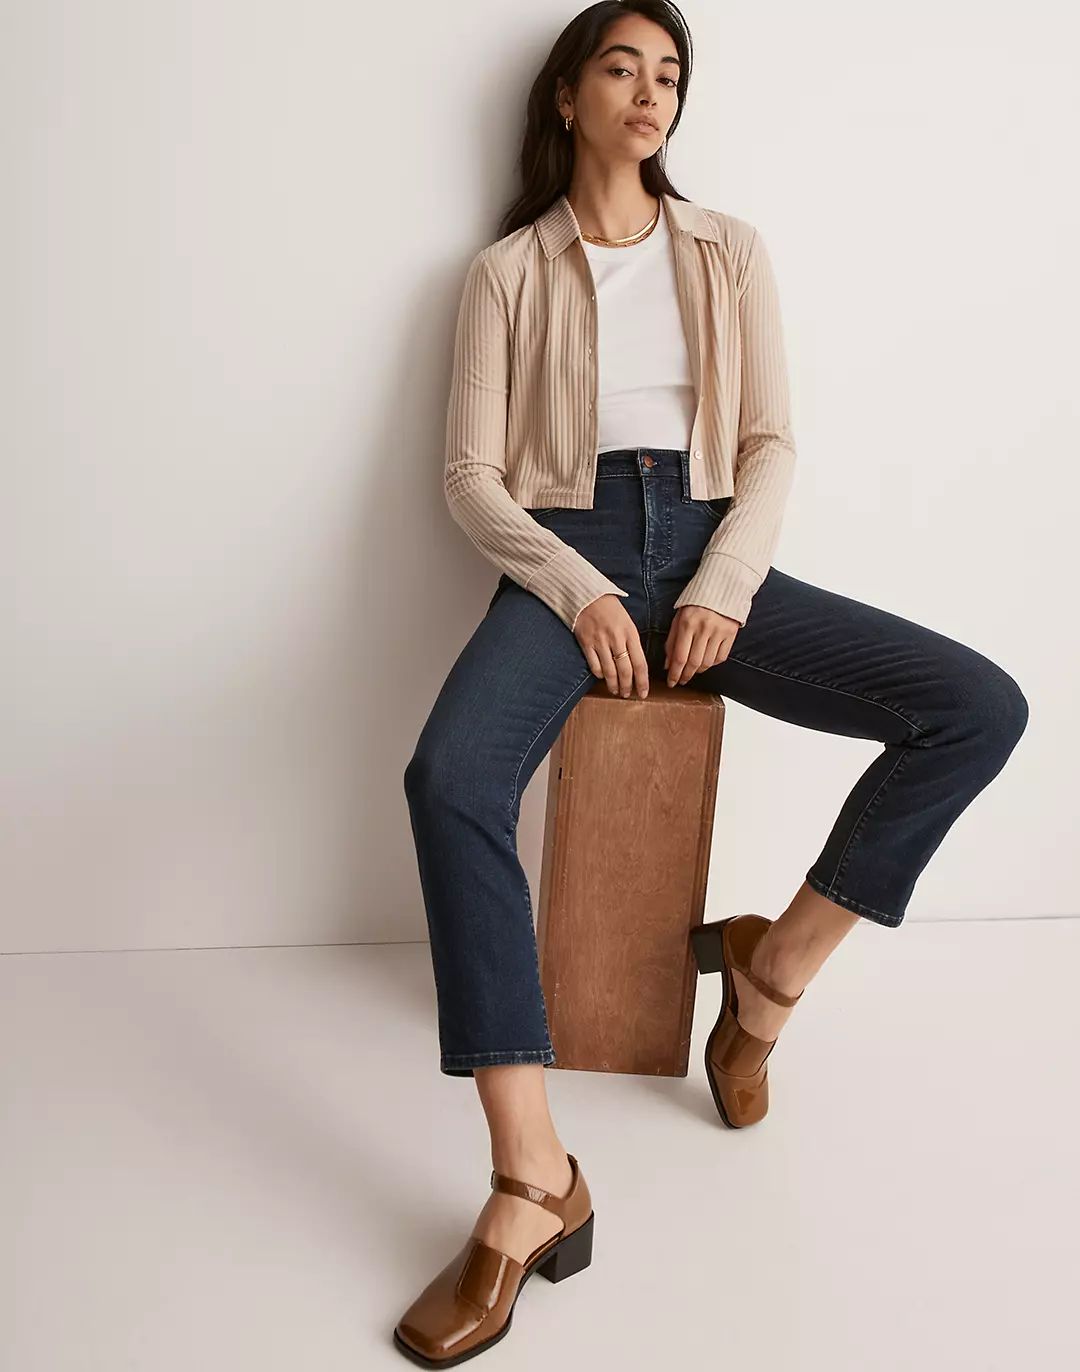 Petite Mid-Rise Stovepipe Jeans in Dahill Wash | Madewell